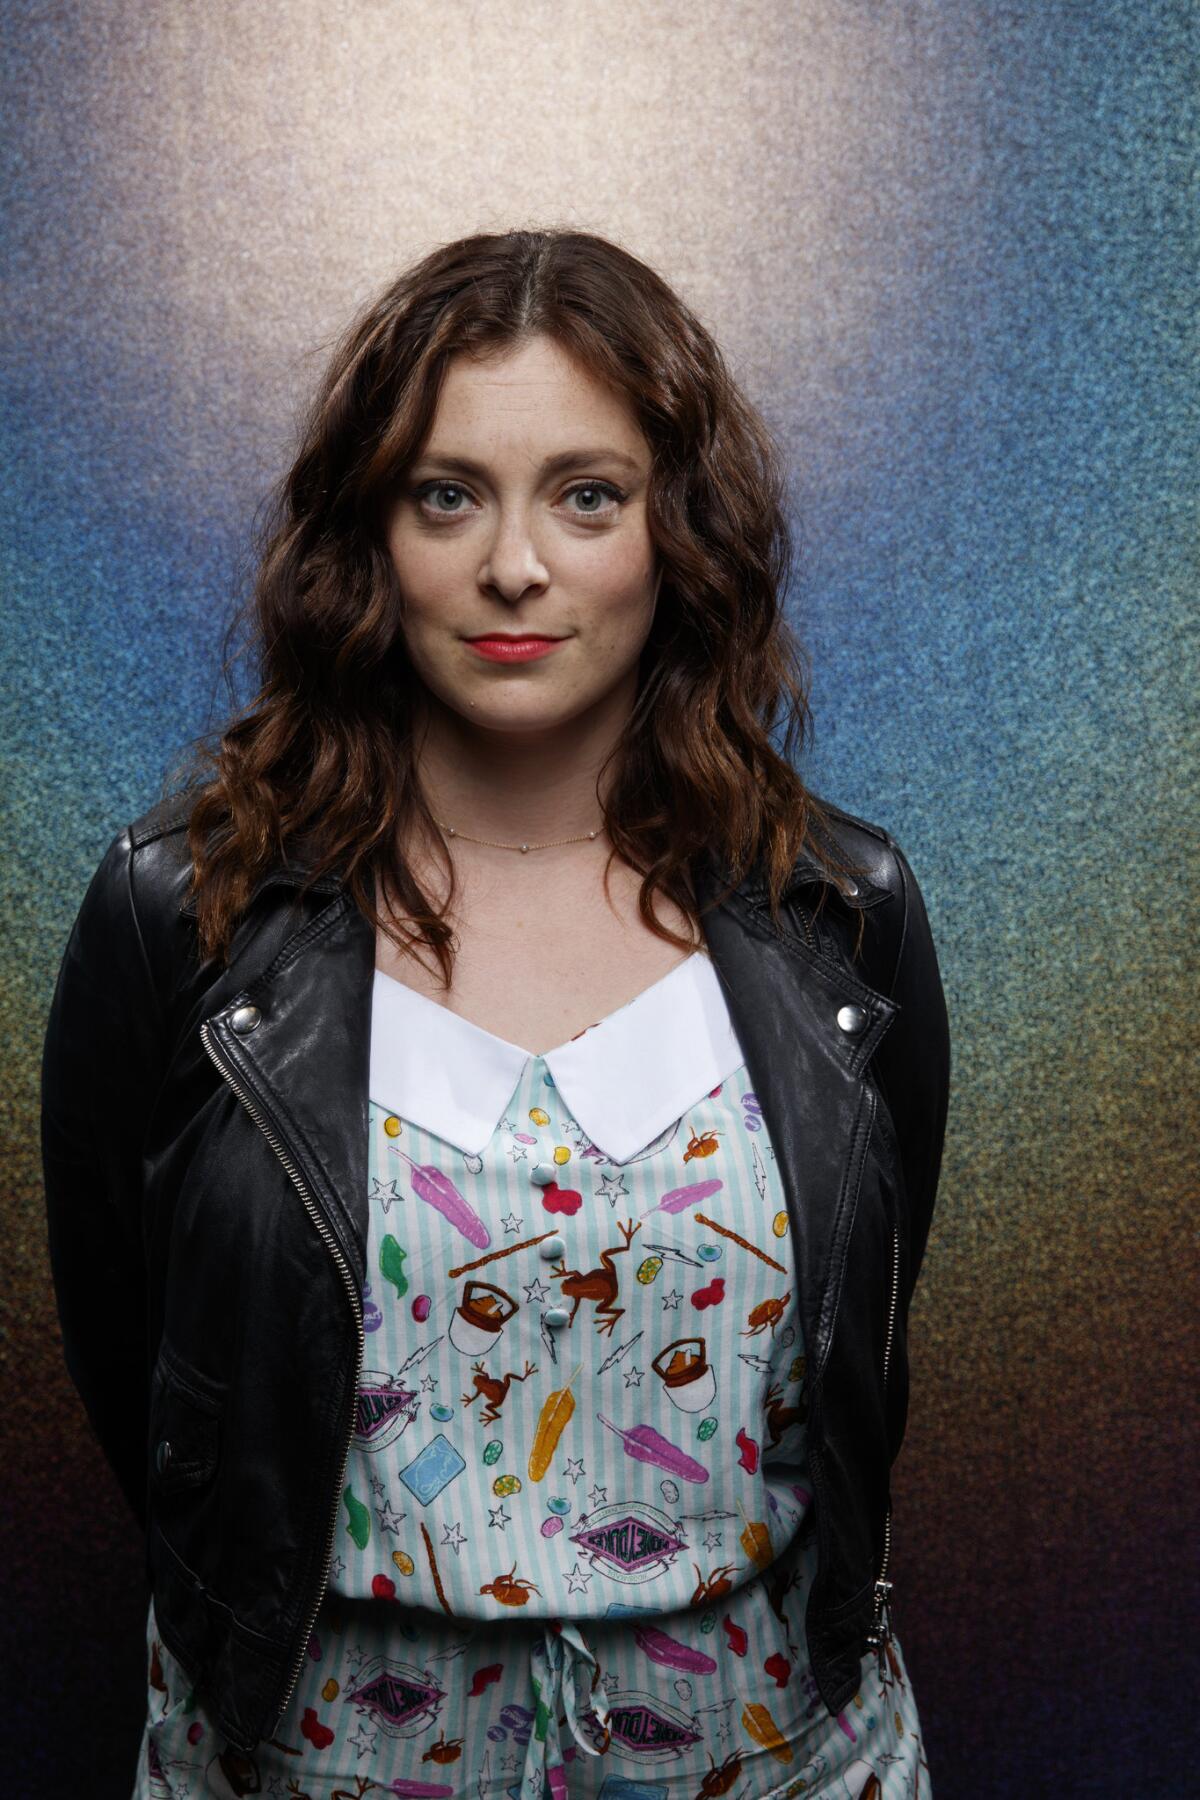 Rachel Bloom from the television series "Crazy Ex-Girlfriend."